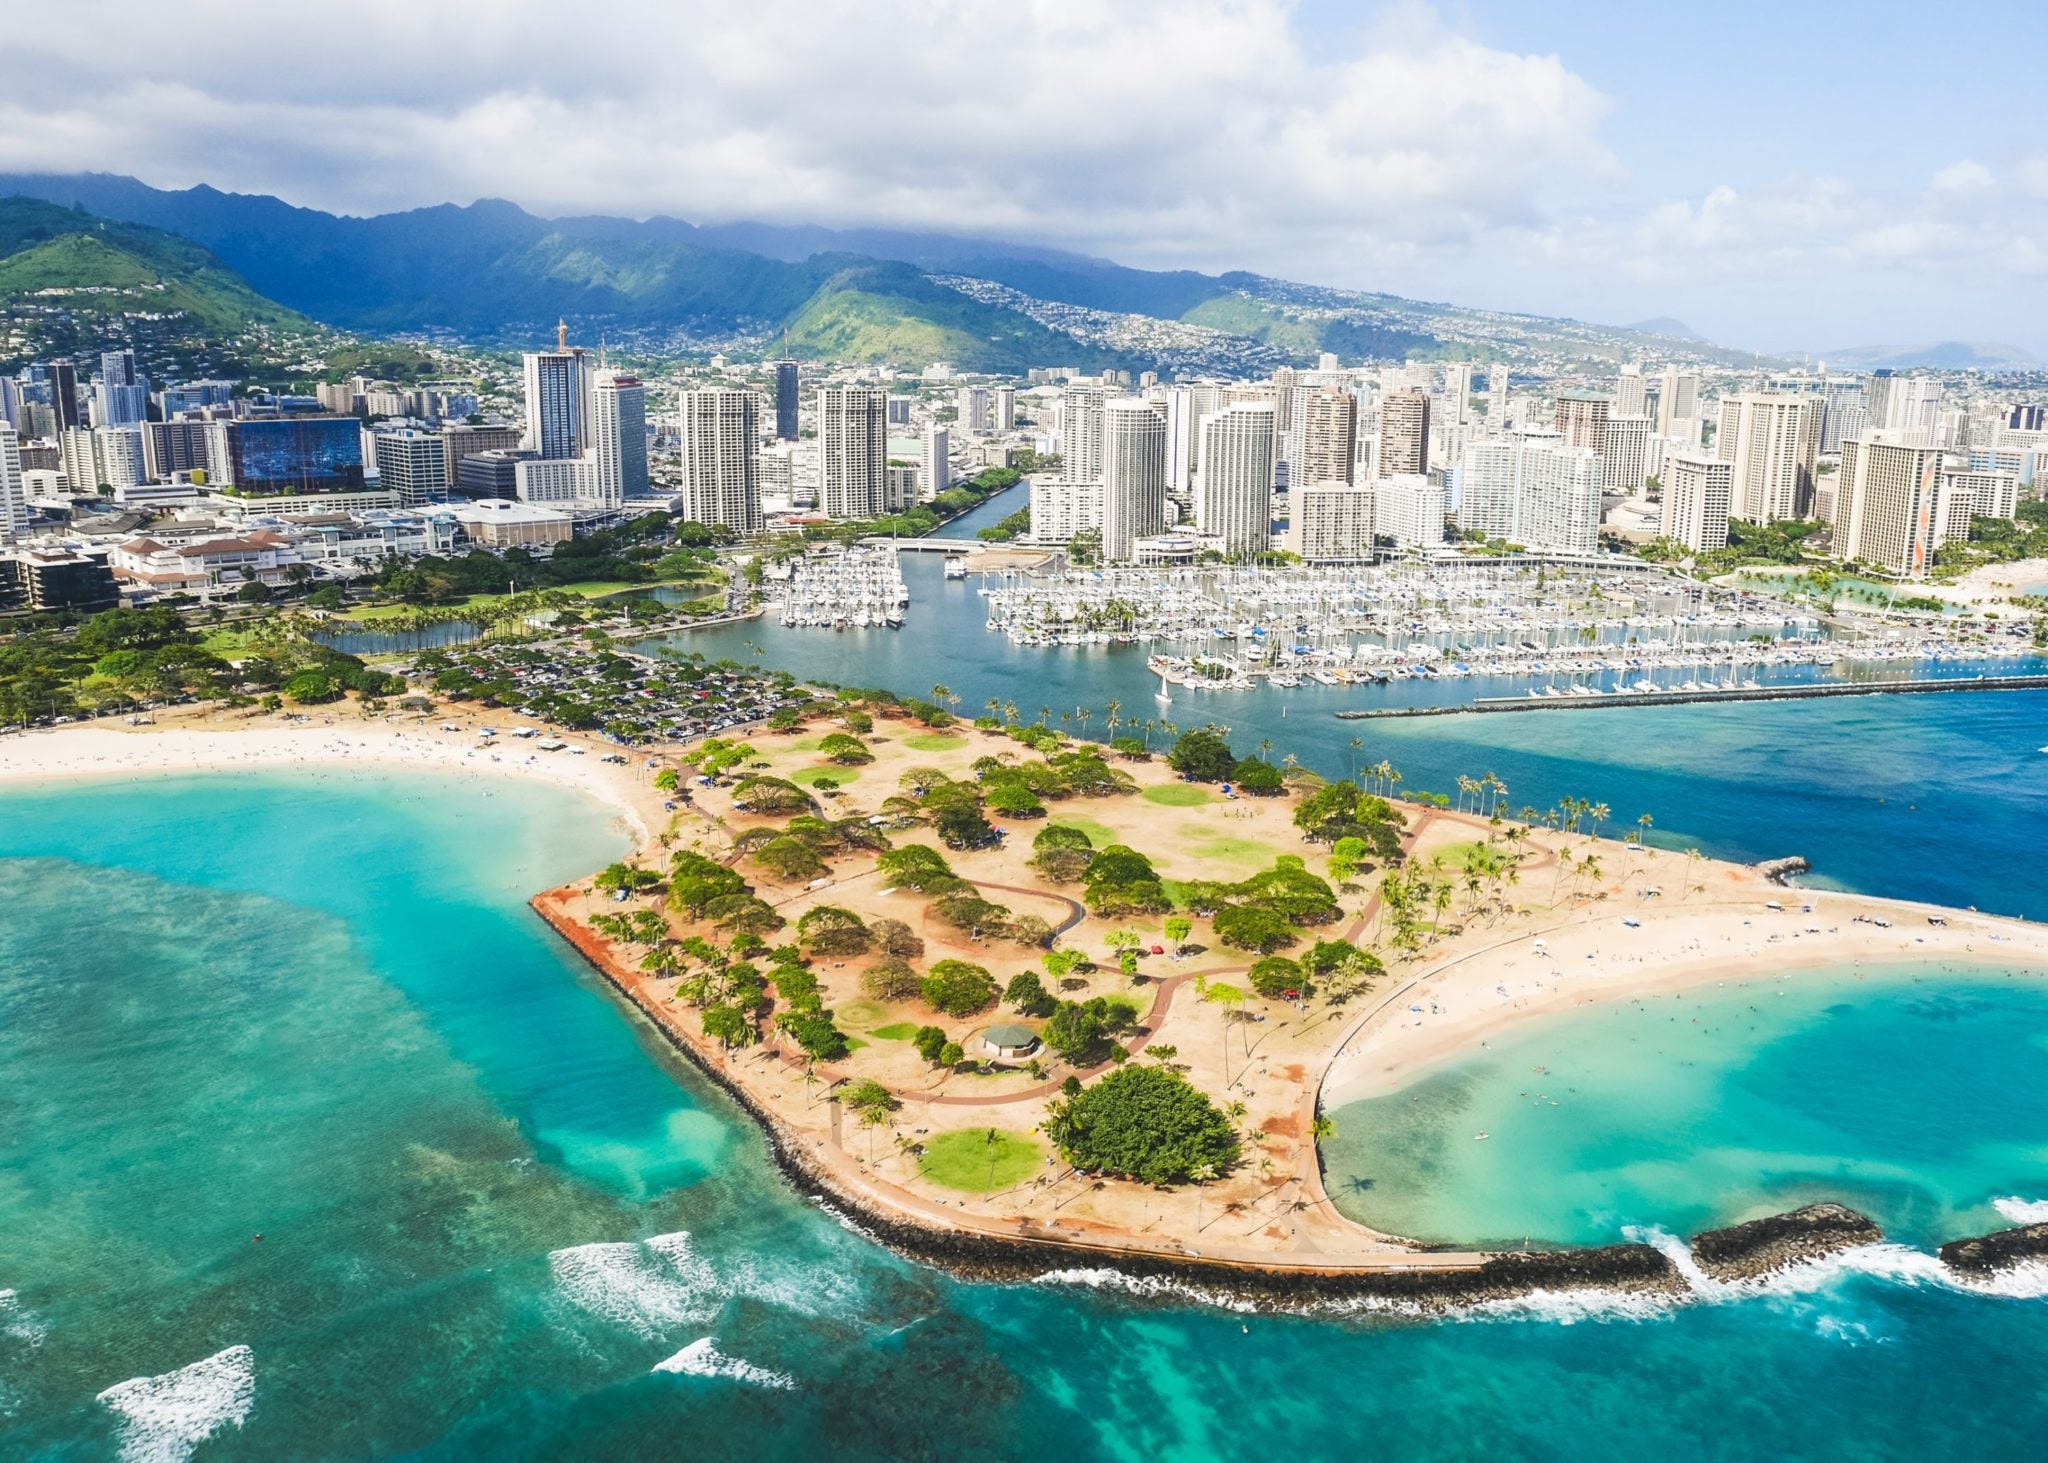 inexpensive time to visit hawaii